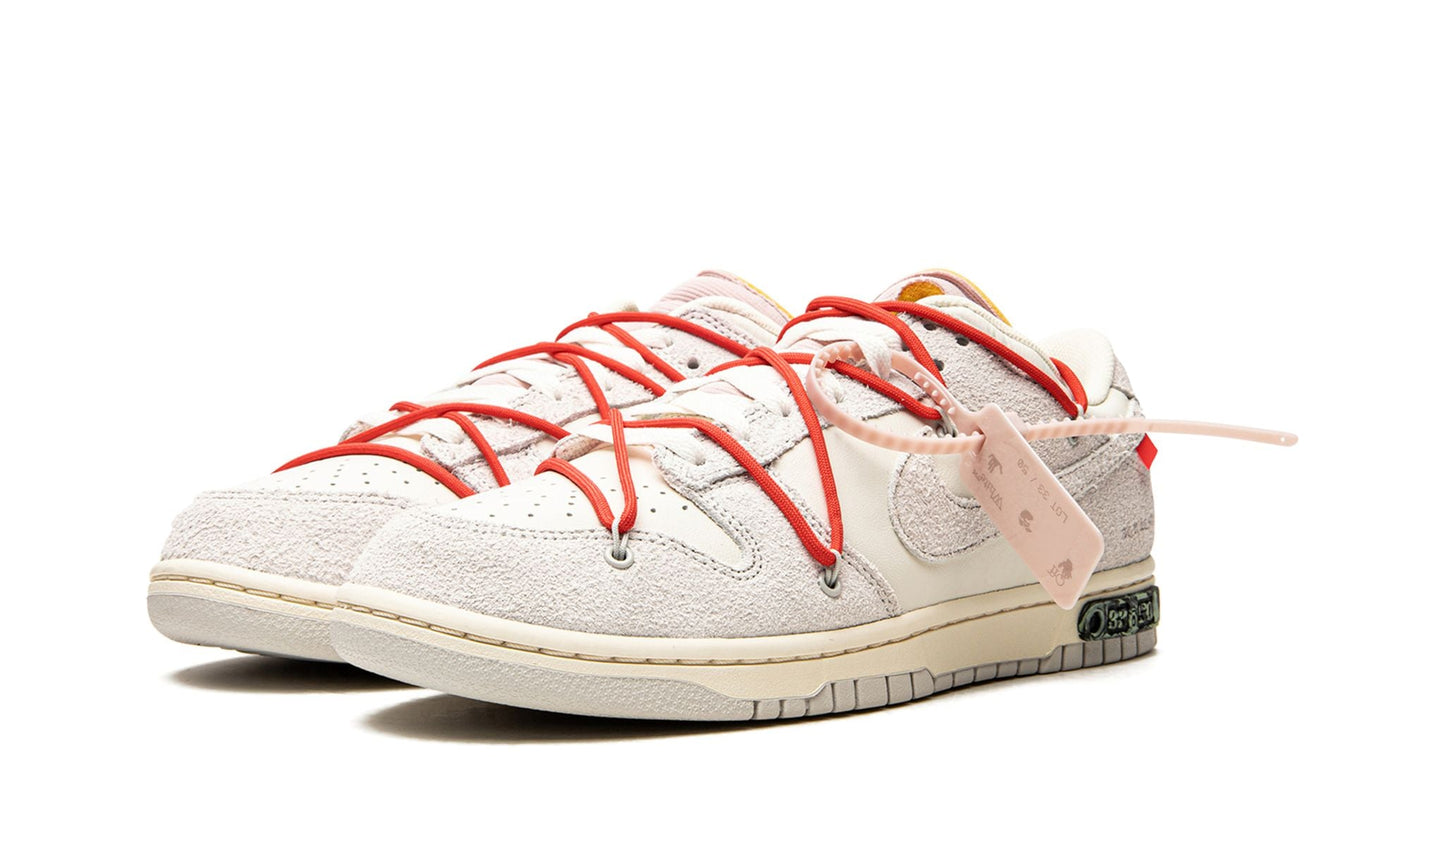 NIKE X OFF-WHITE DUNK LOW "Off-White - Lot 33"